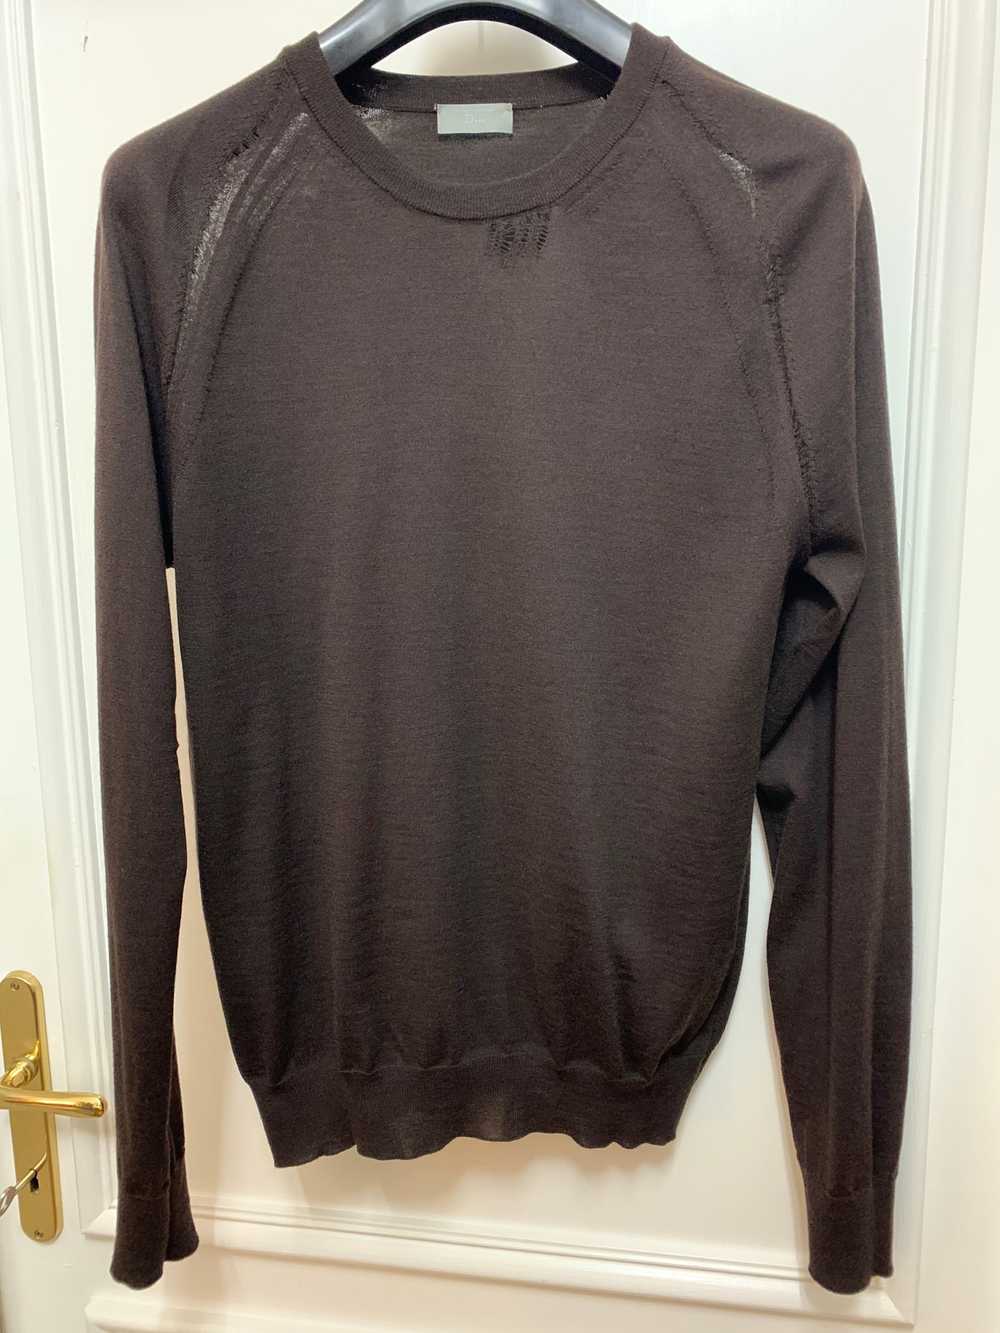 Dior Dior Homme Hedi Slimane Sweater in size -S- - image 1